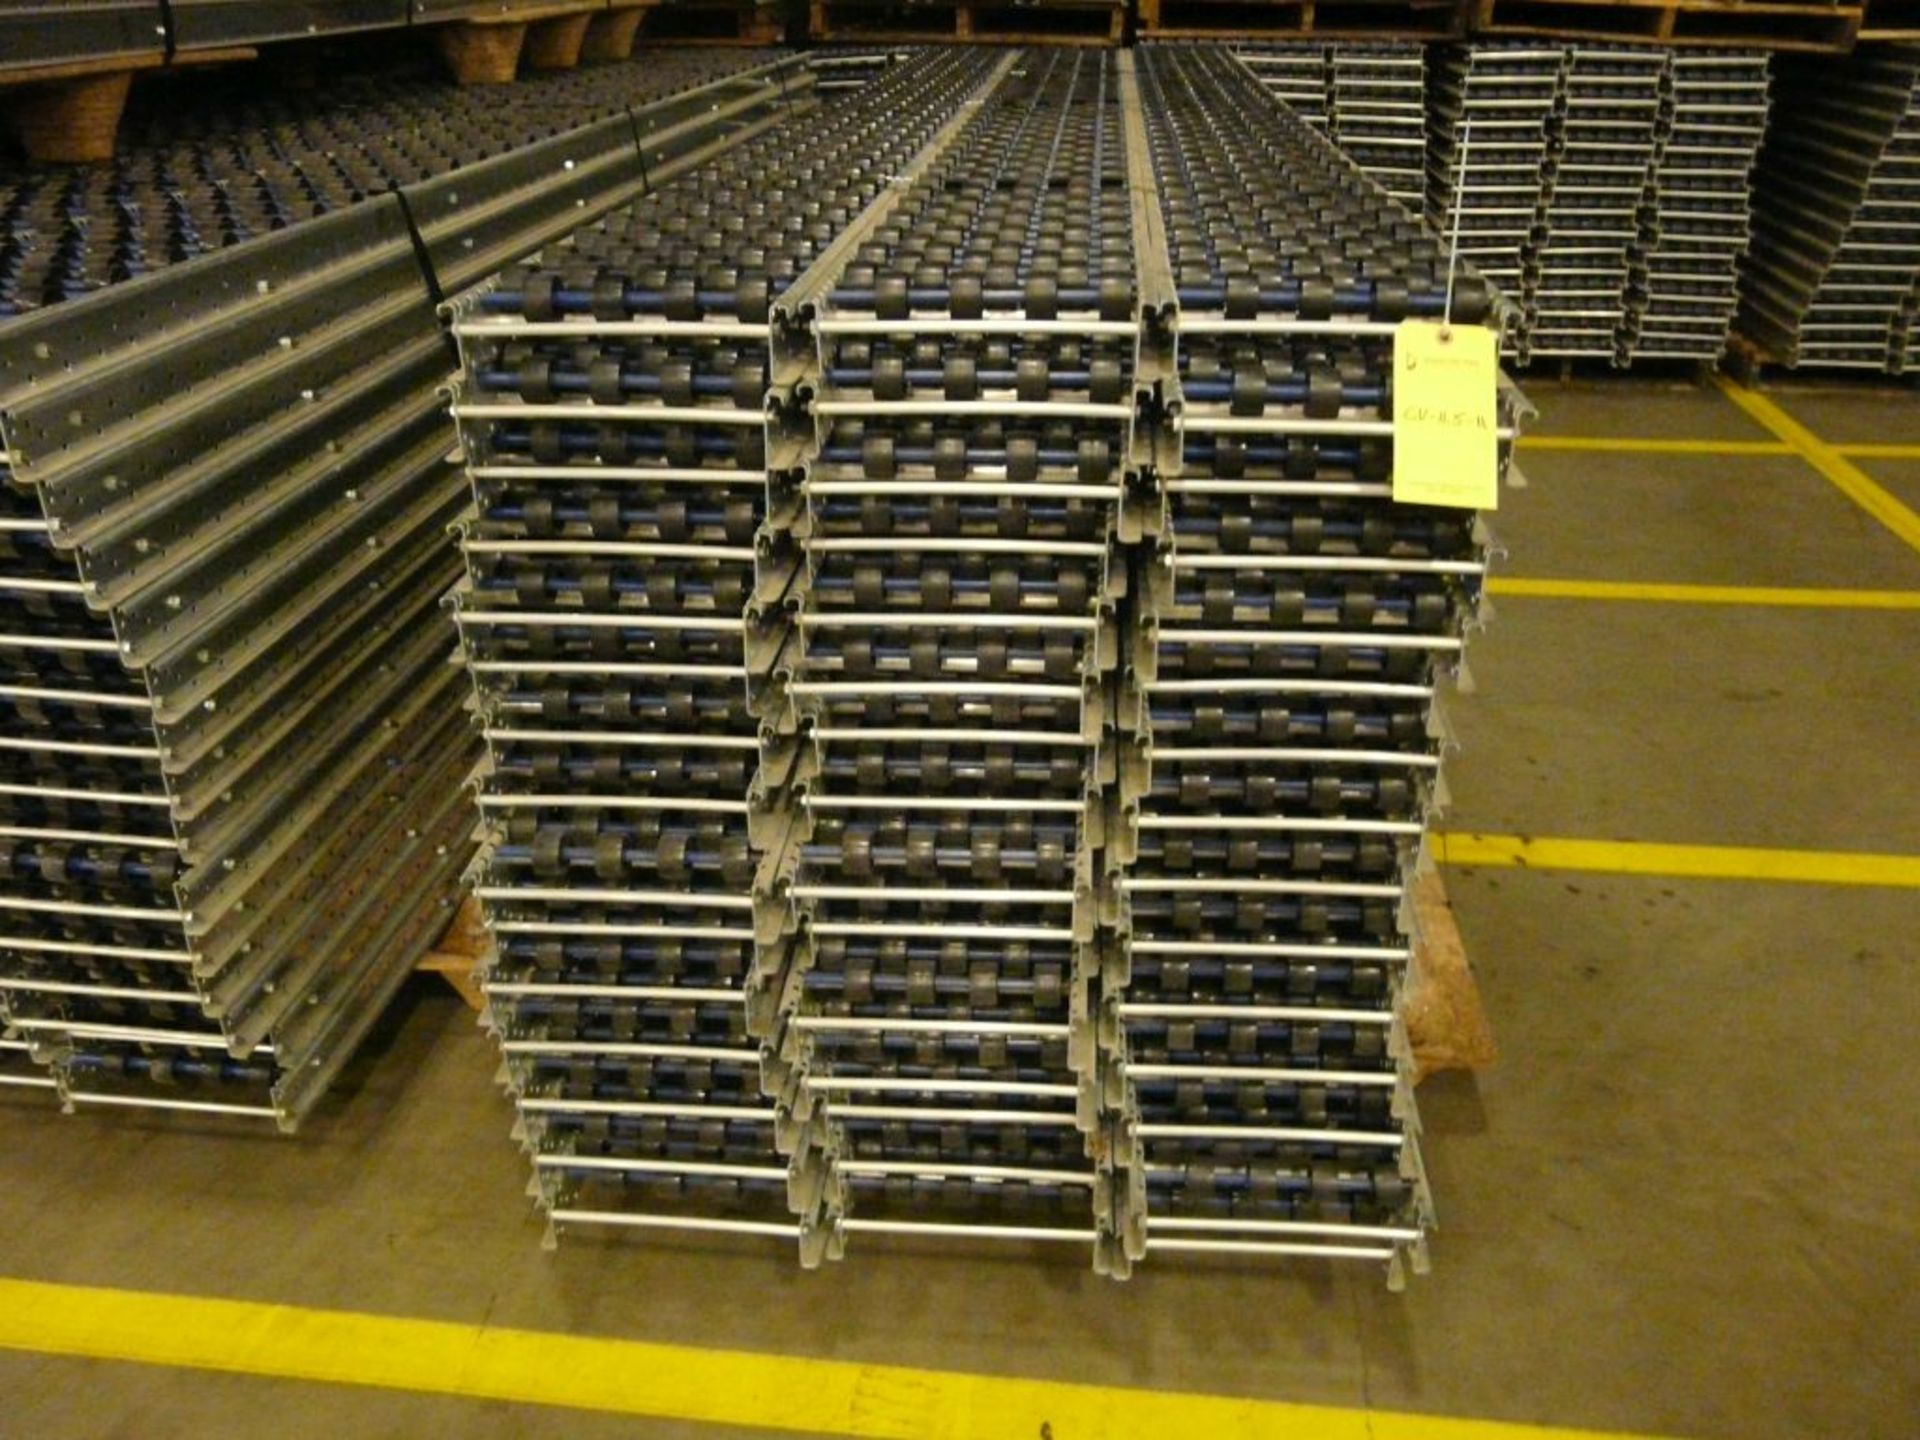 Lot of (90) SpanTrack Wheelbed Carton Flow Conveyors - 11.5'L x 11"W; Tag: 223578 - $30 Lot - Image 2 of 4